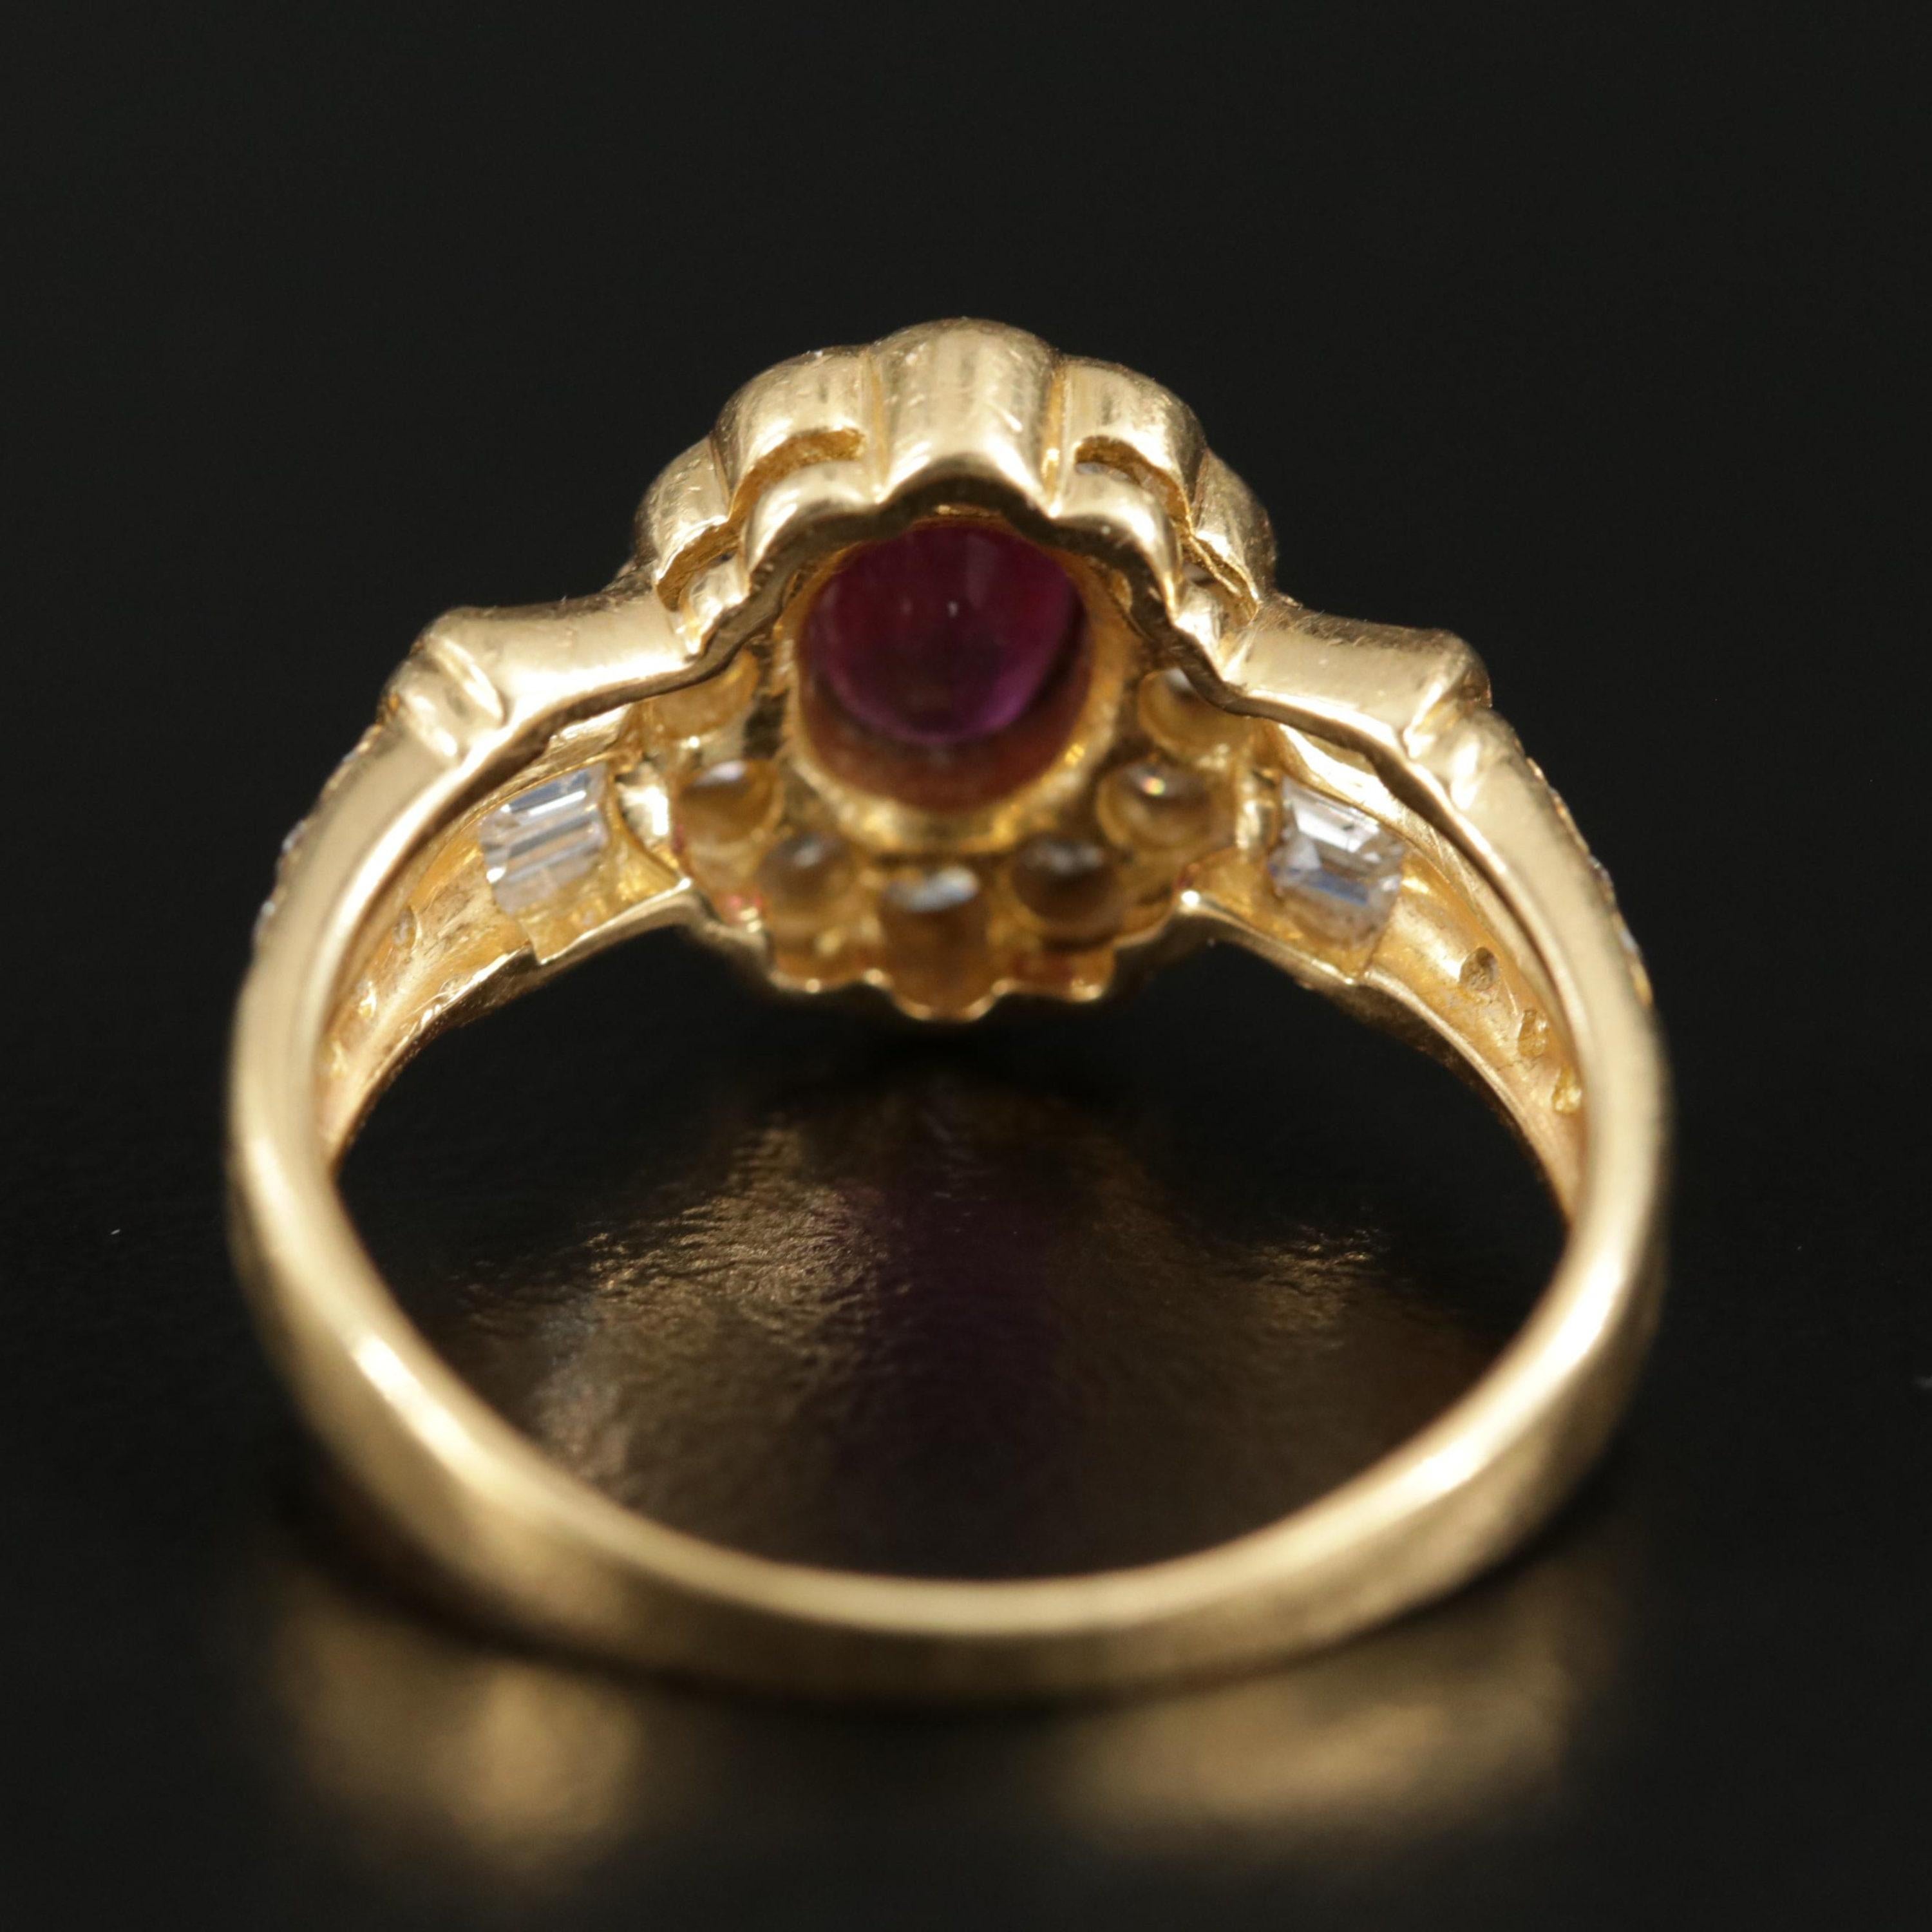 For Sale:  European Oval Cut Ruby Engagement Ring Victorian Ruby Yellow Gold Wedding Ring 3